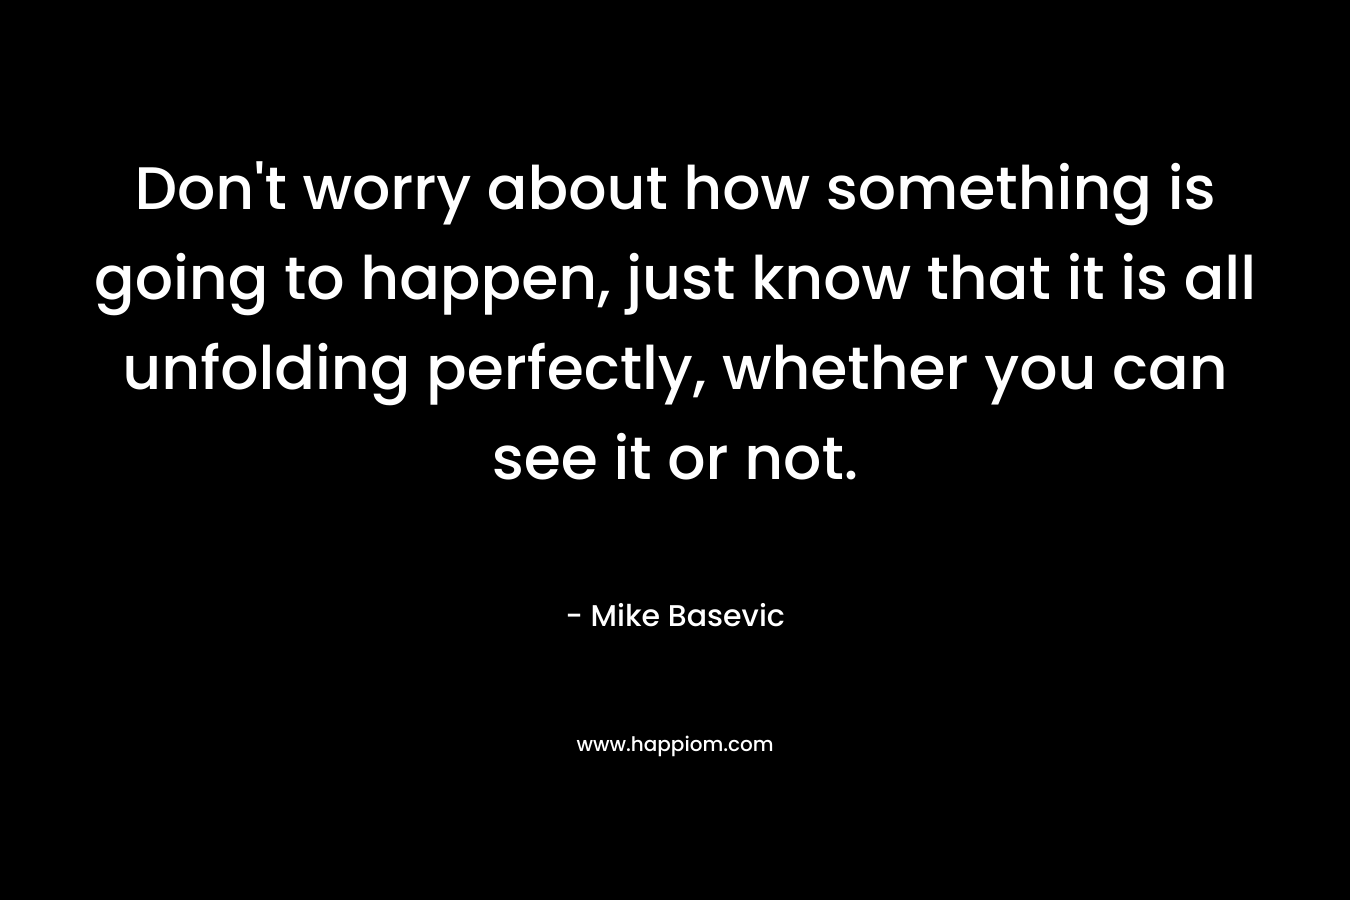 Don’t worry about how something is going to happen, just know that it is all unfolding perfectly, whether you can see it or not. – Mike Basevic